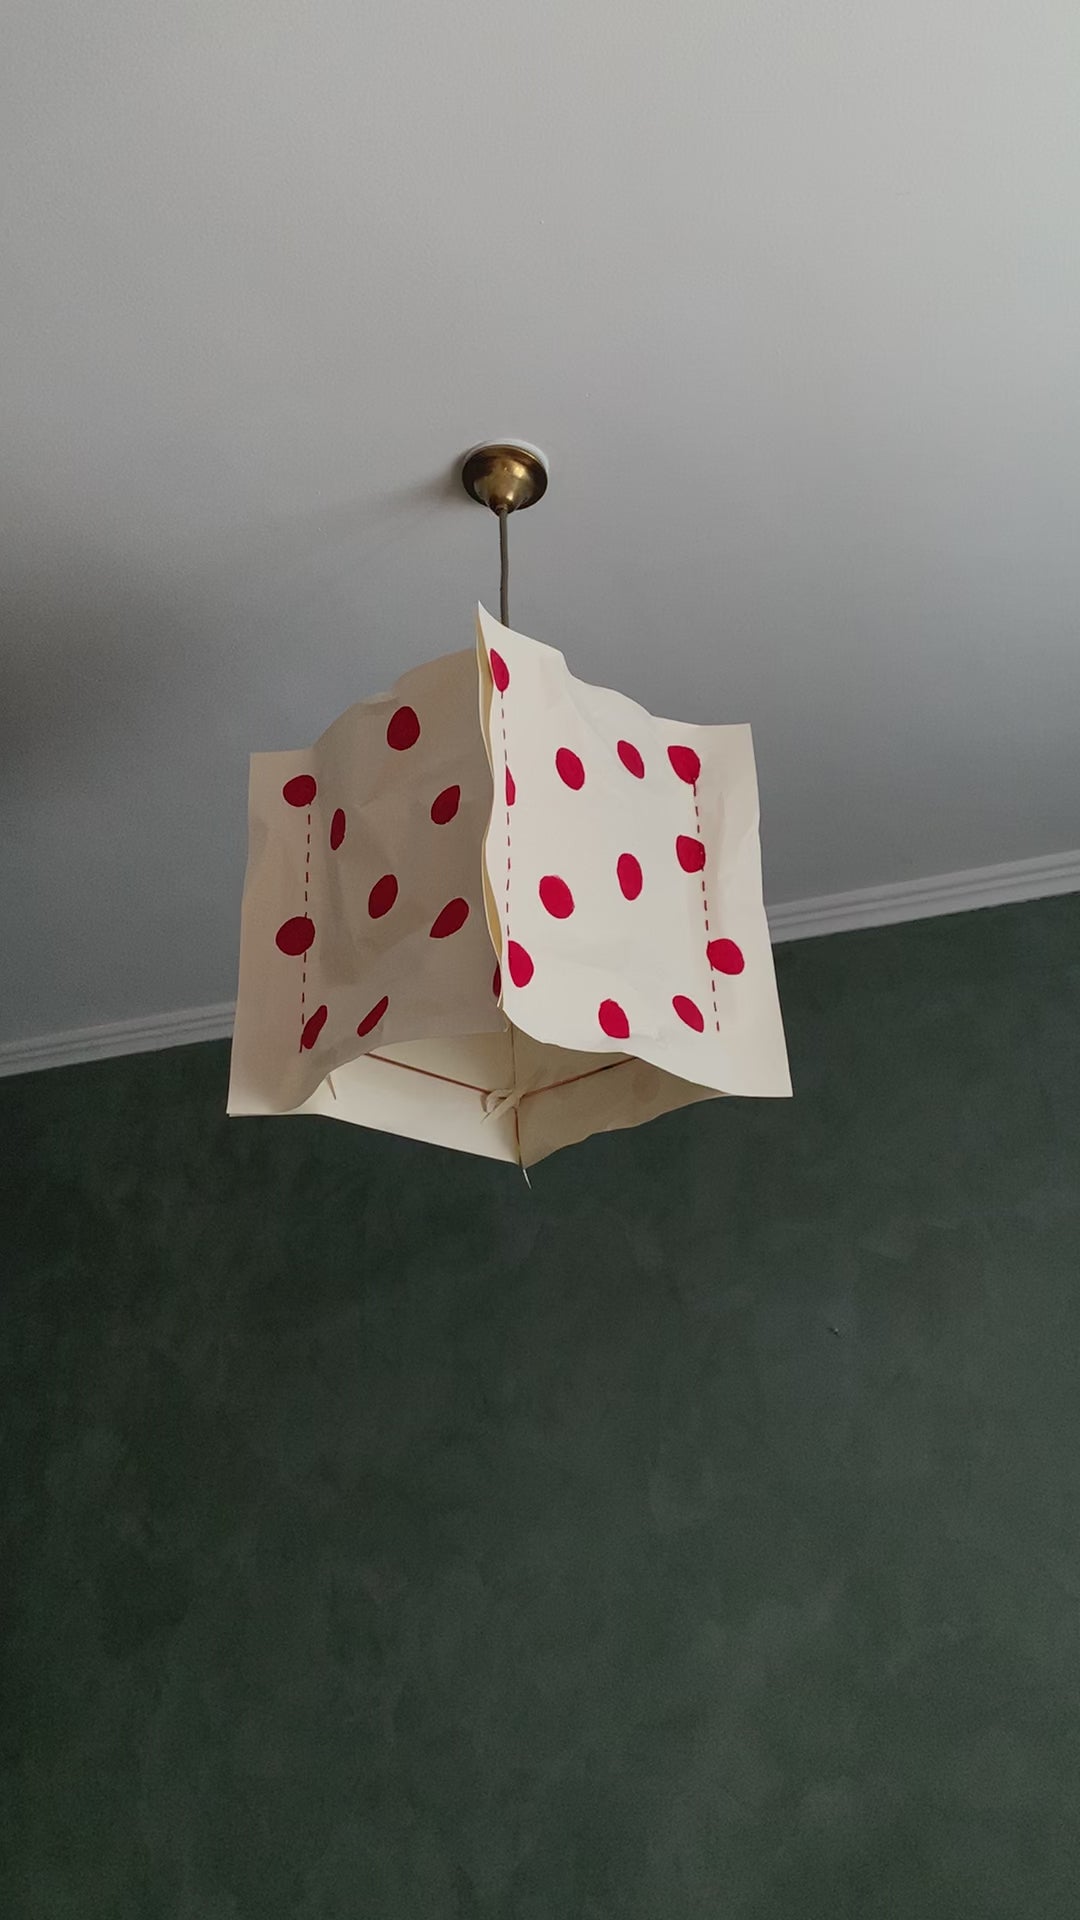 Lampshade #6 - Red Dots